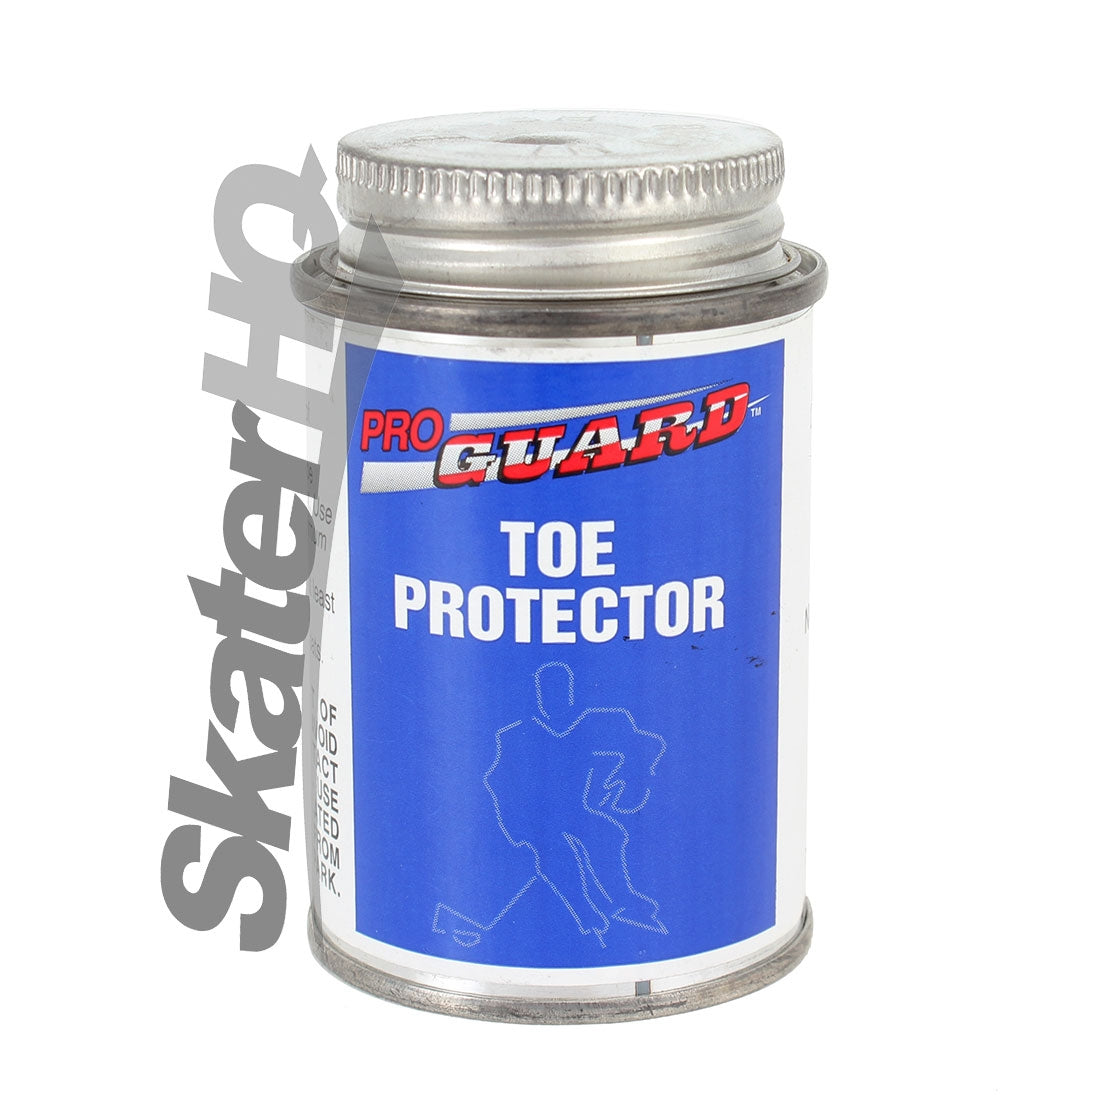 Pro Guard Toe Protector - Black Roller Skate Hardware and Parts